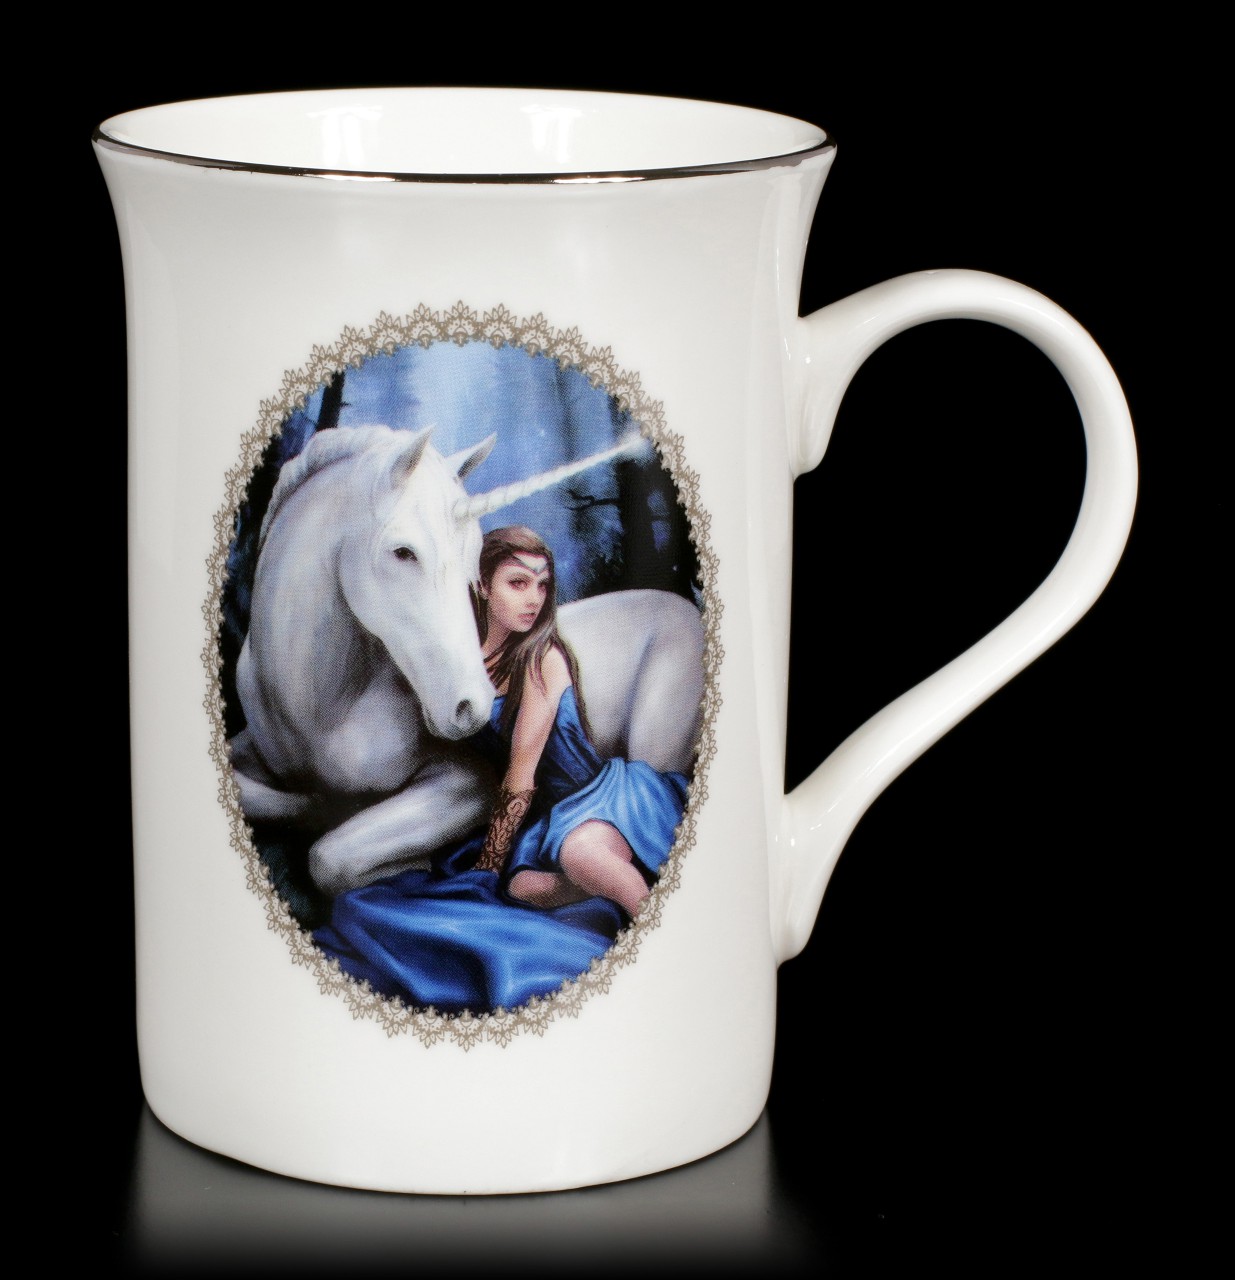 Mug with Unicorn - Blue Moon by Anne Stokes